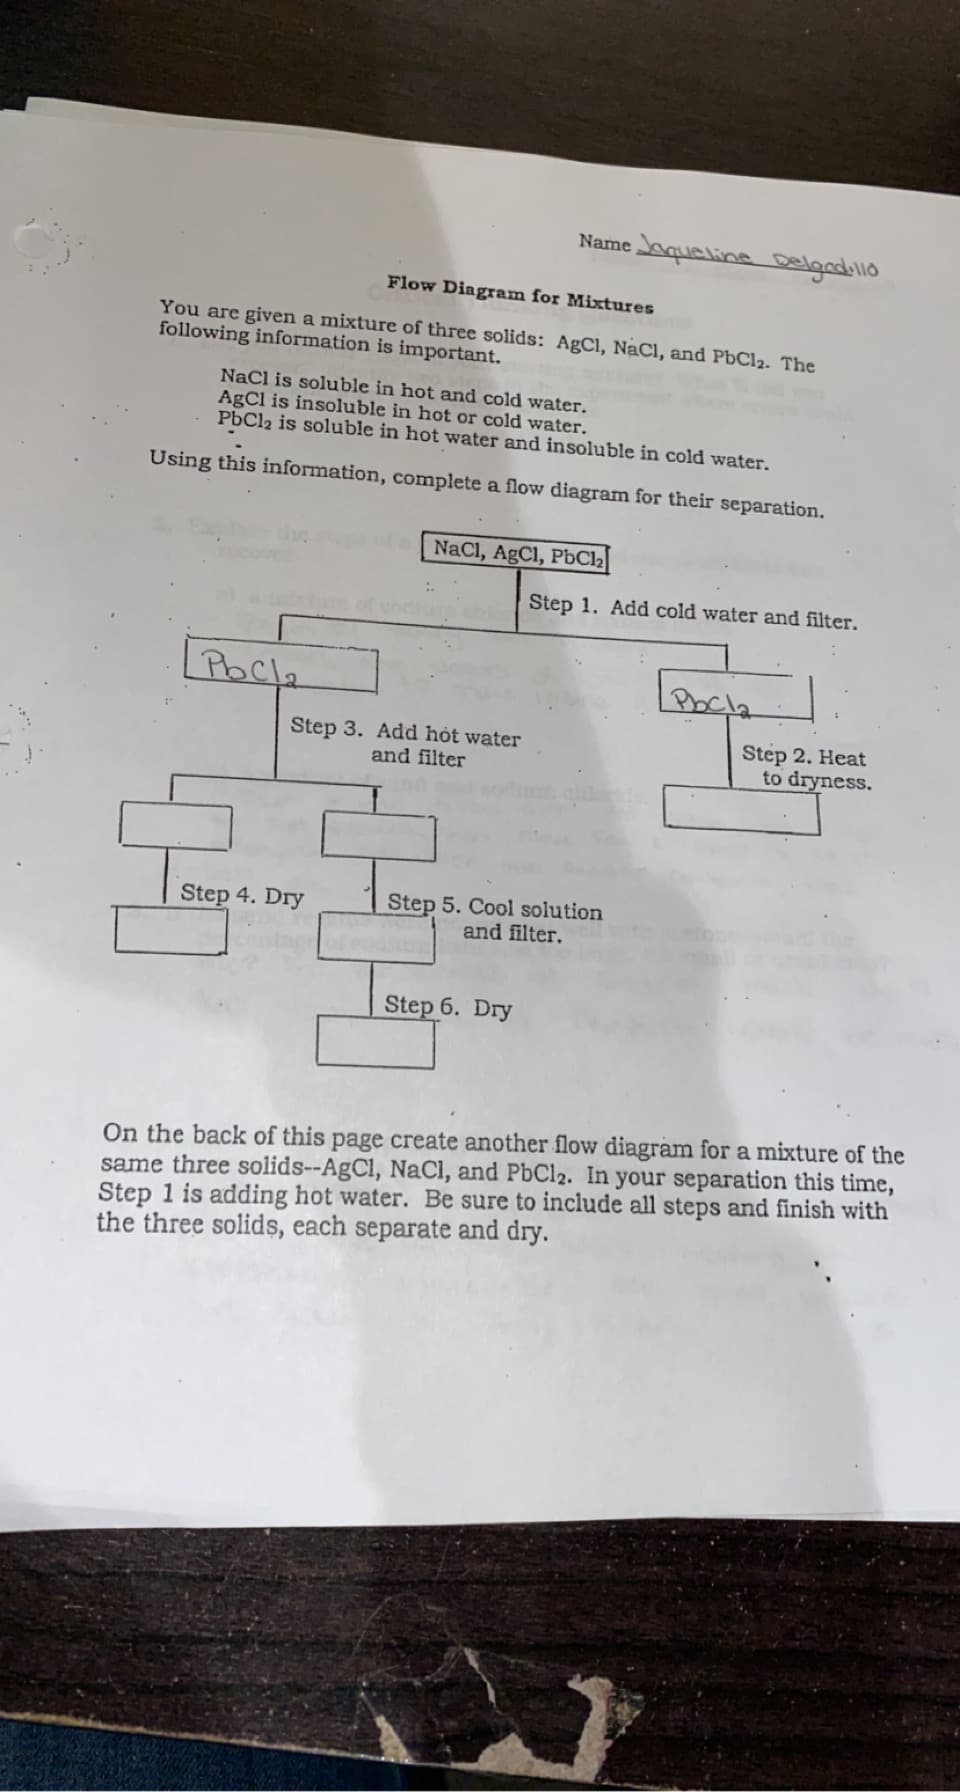 Name queline Delgadillo
Flow Diagram for Mixtures
You are given a mixture of three solids: AgCl, NaCI, and PbCl2. The
following information is important.
Nacl is soluble in hot and cold water.
AgCl is insoluble in hot or cold water.
PbCl2 is soluble in hot water and insoluble in cold water.
Using this information, complete a flow diagram for their separation.
NaCl, AgCl, PBC22|
Step 1. Add cold water and filter.
Pocla
Pocla
Step 3. Add hỏt water
and filter
Step 2. Heat
to dryness.
Step 5. Cool solution
and filter.
Step 4. Dry
Step 6. Dry
On the back of this page create another flow diagram for a mixture of the
same three solids--AgCl, NaCI, and PbCl2. In your separation this time,
Step 1 is adding hot water. Be sure to include all steps and finish with
the three solids, each separate and dry.
